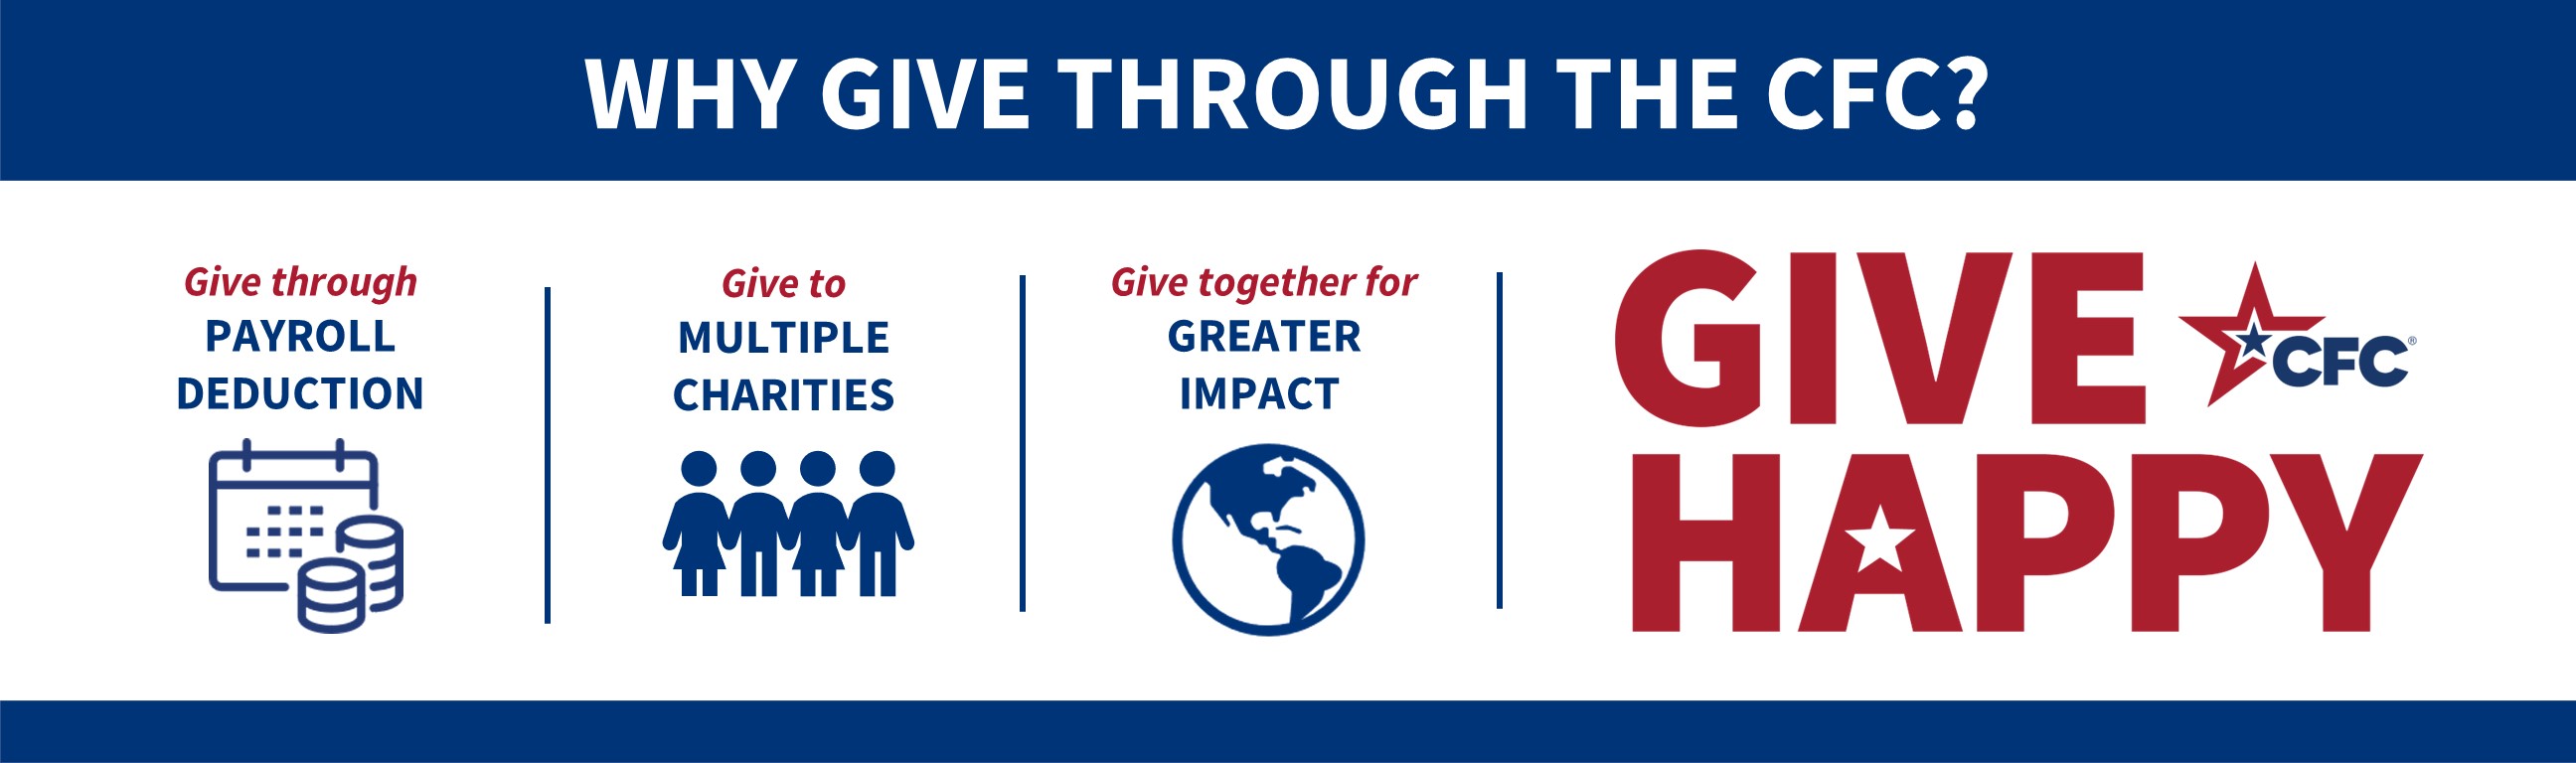 Banner giving four reasons to give through the CFC (1) Give through payroll deduction (2) give to multiple charities (3) give together for greater impact (4) GIVE HAPPY